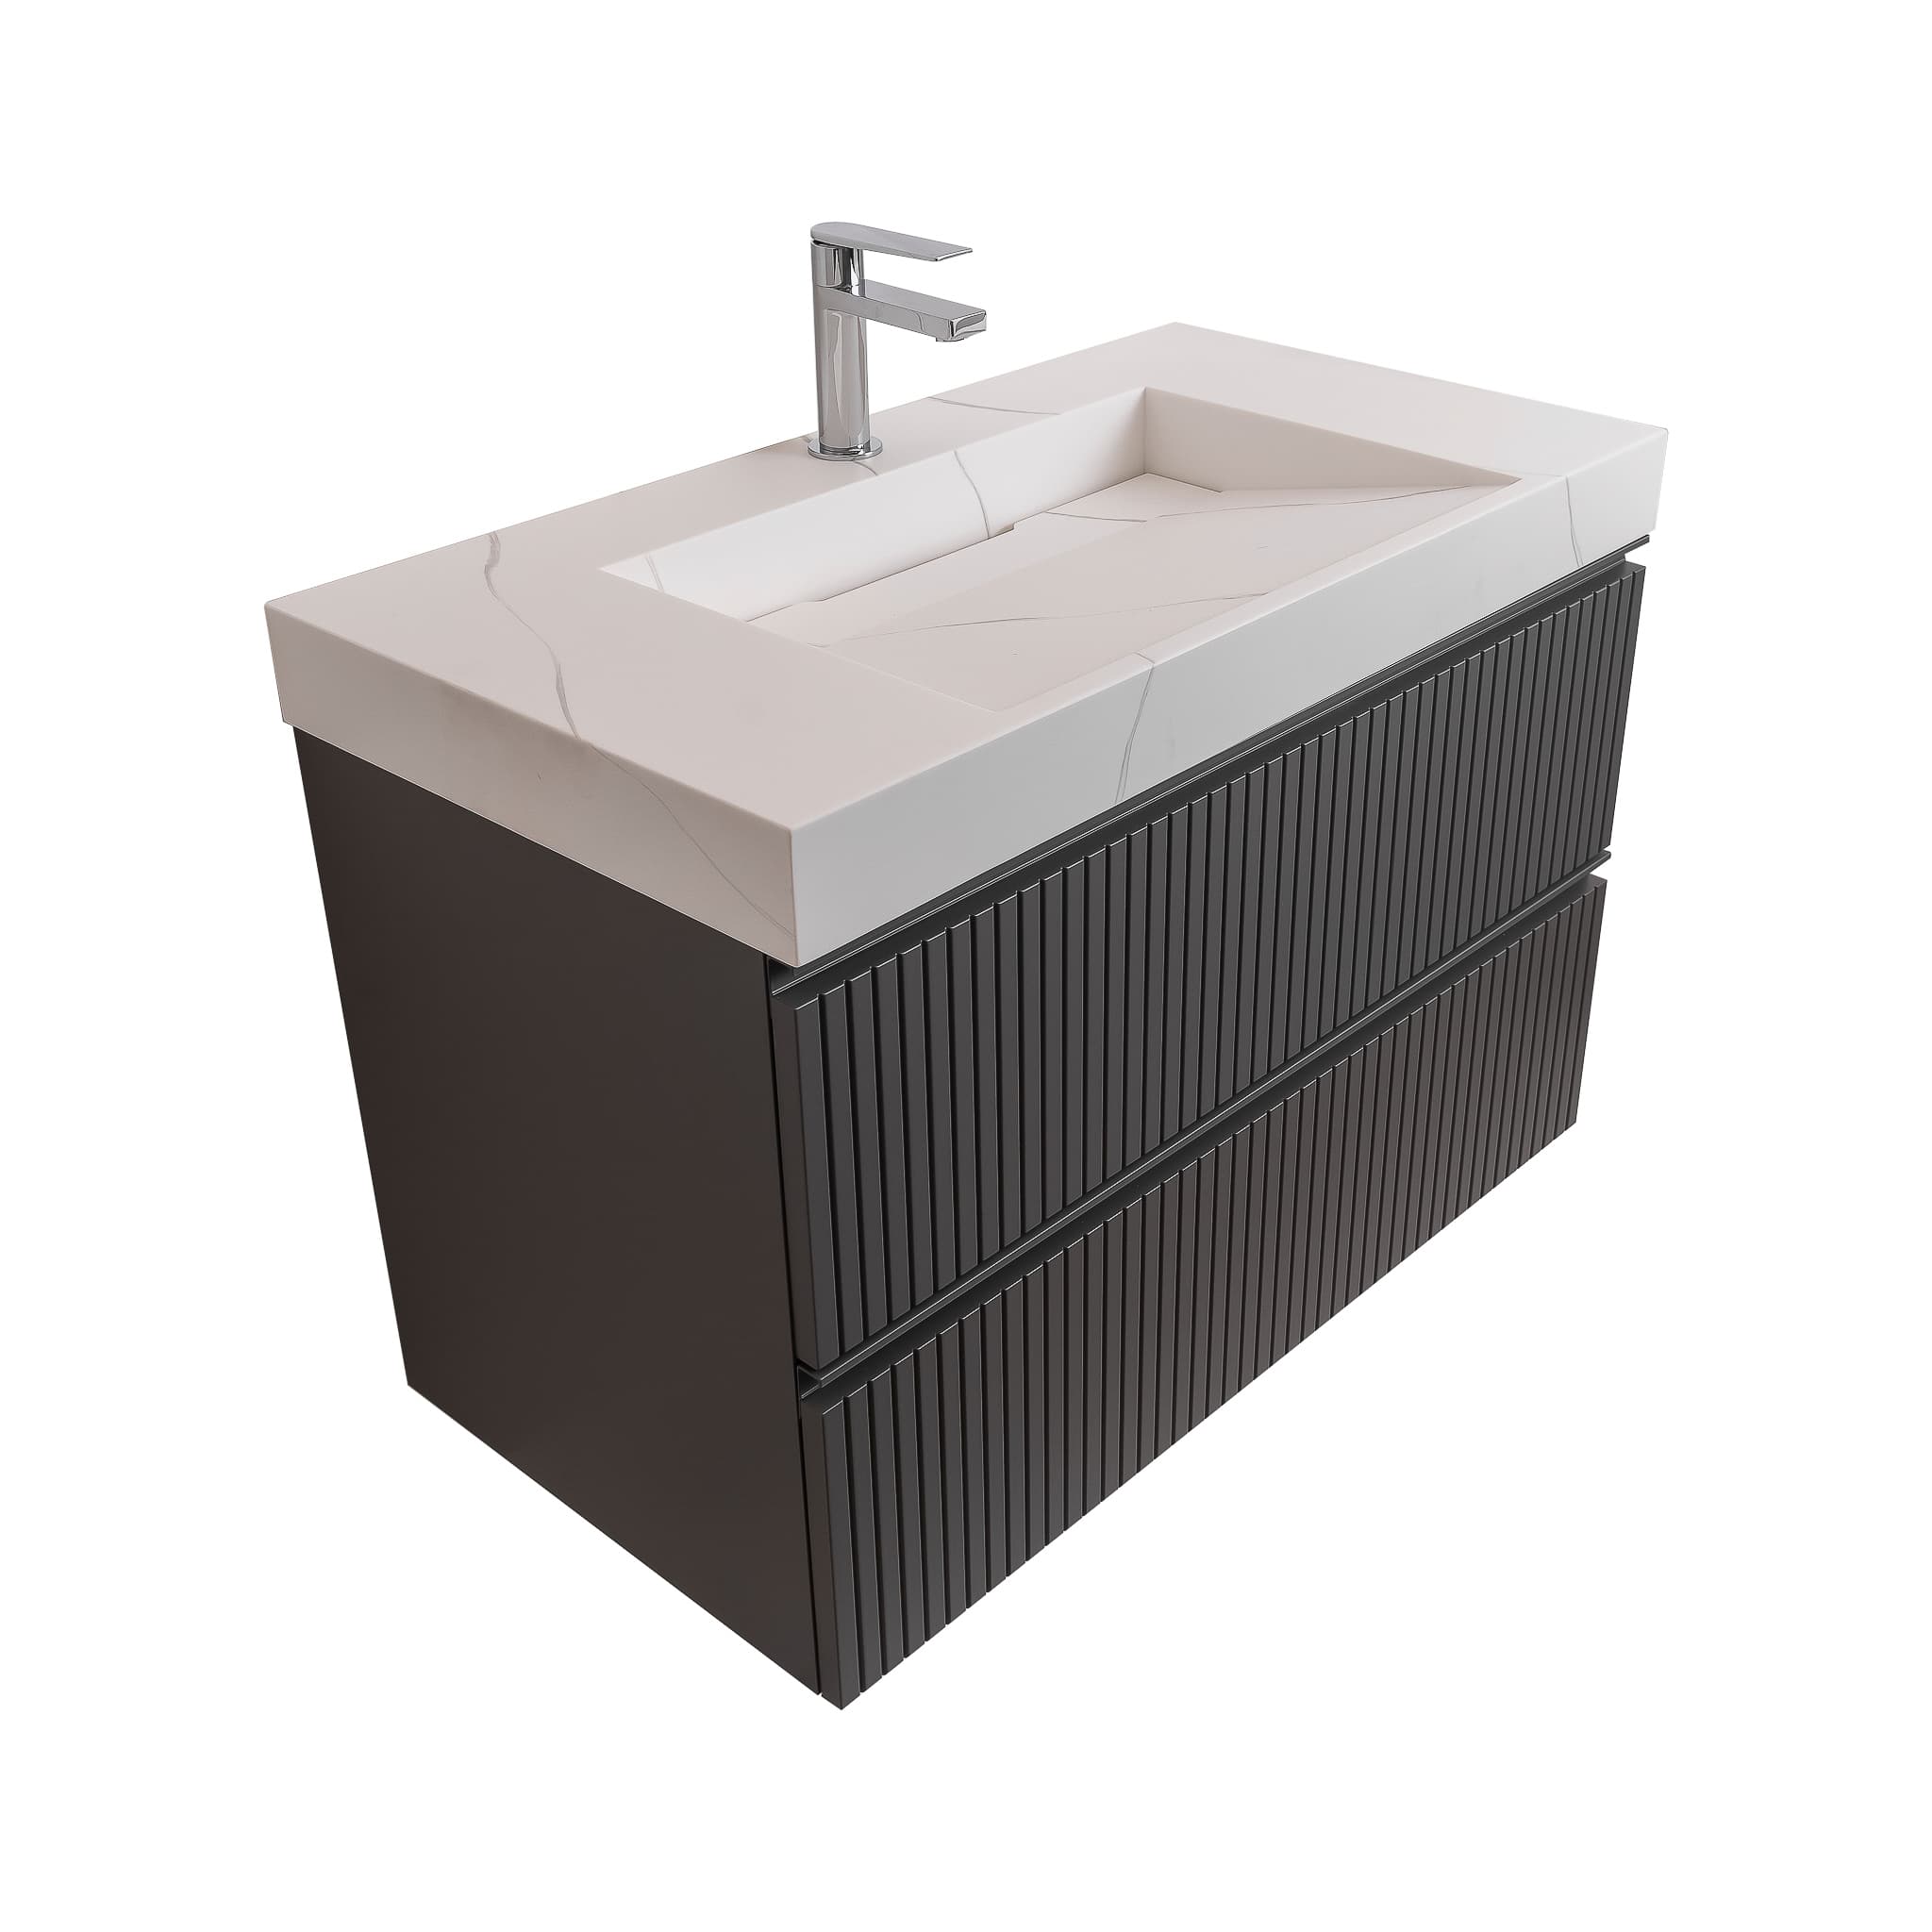 Ares 31.5 Matte Grey Cabinet, Solid Surface Matte White Top Carrara Infinity Sink, Wall Mounted Modern Vanity Set